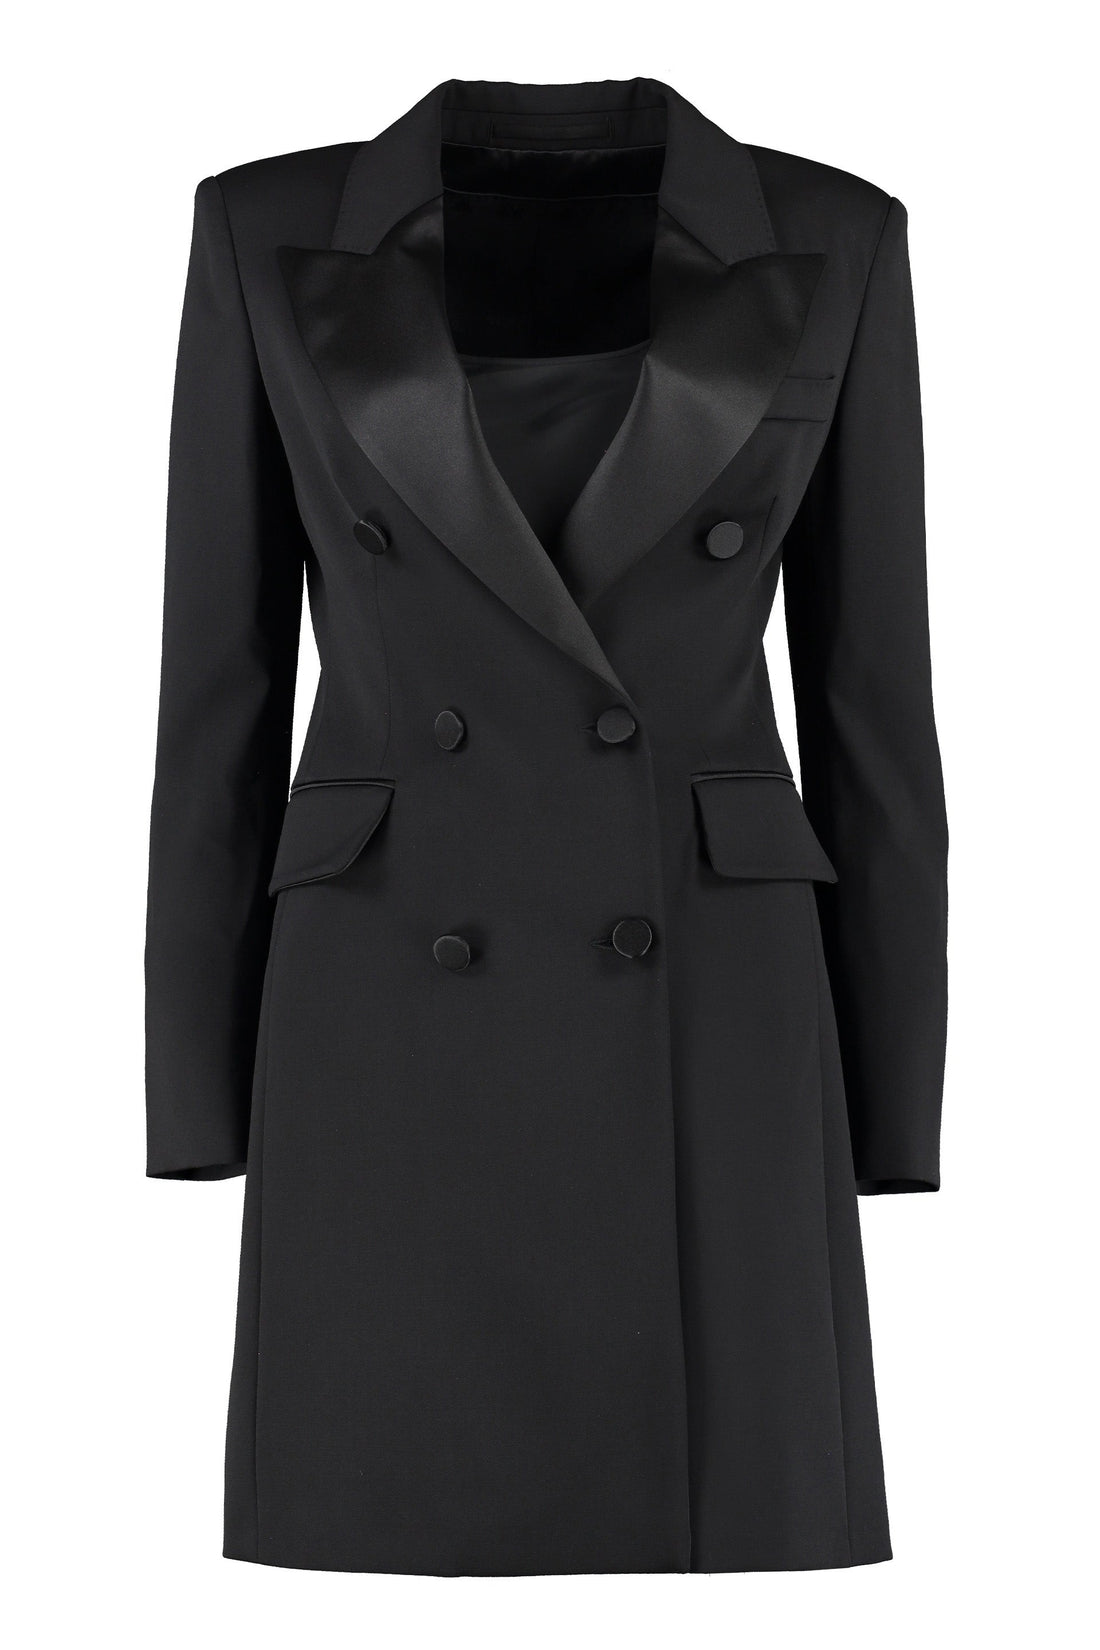 Max Mara-OUTLET-SALE-Double breasted blazer dress-ARCHIVIST